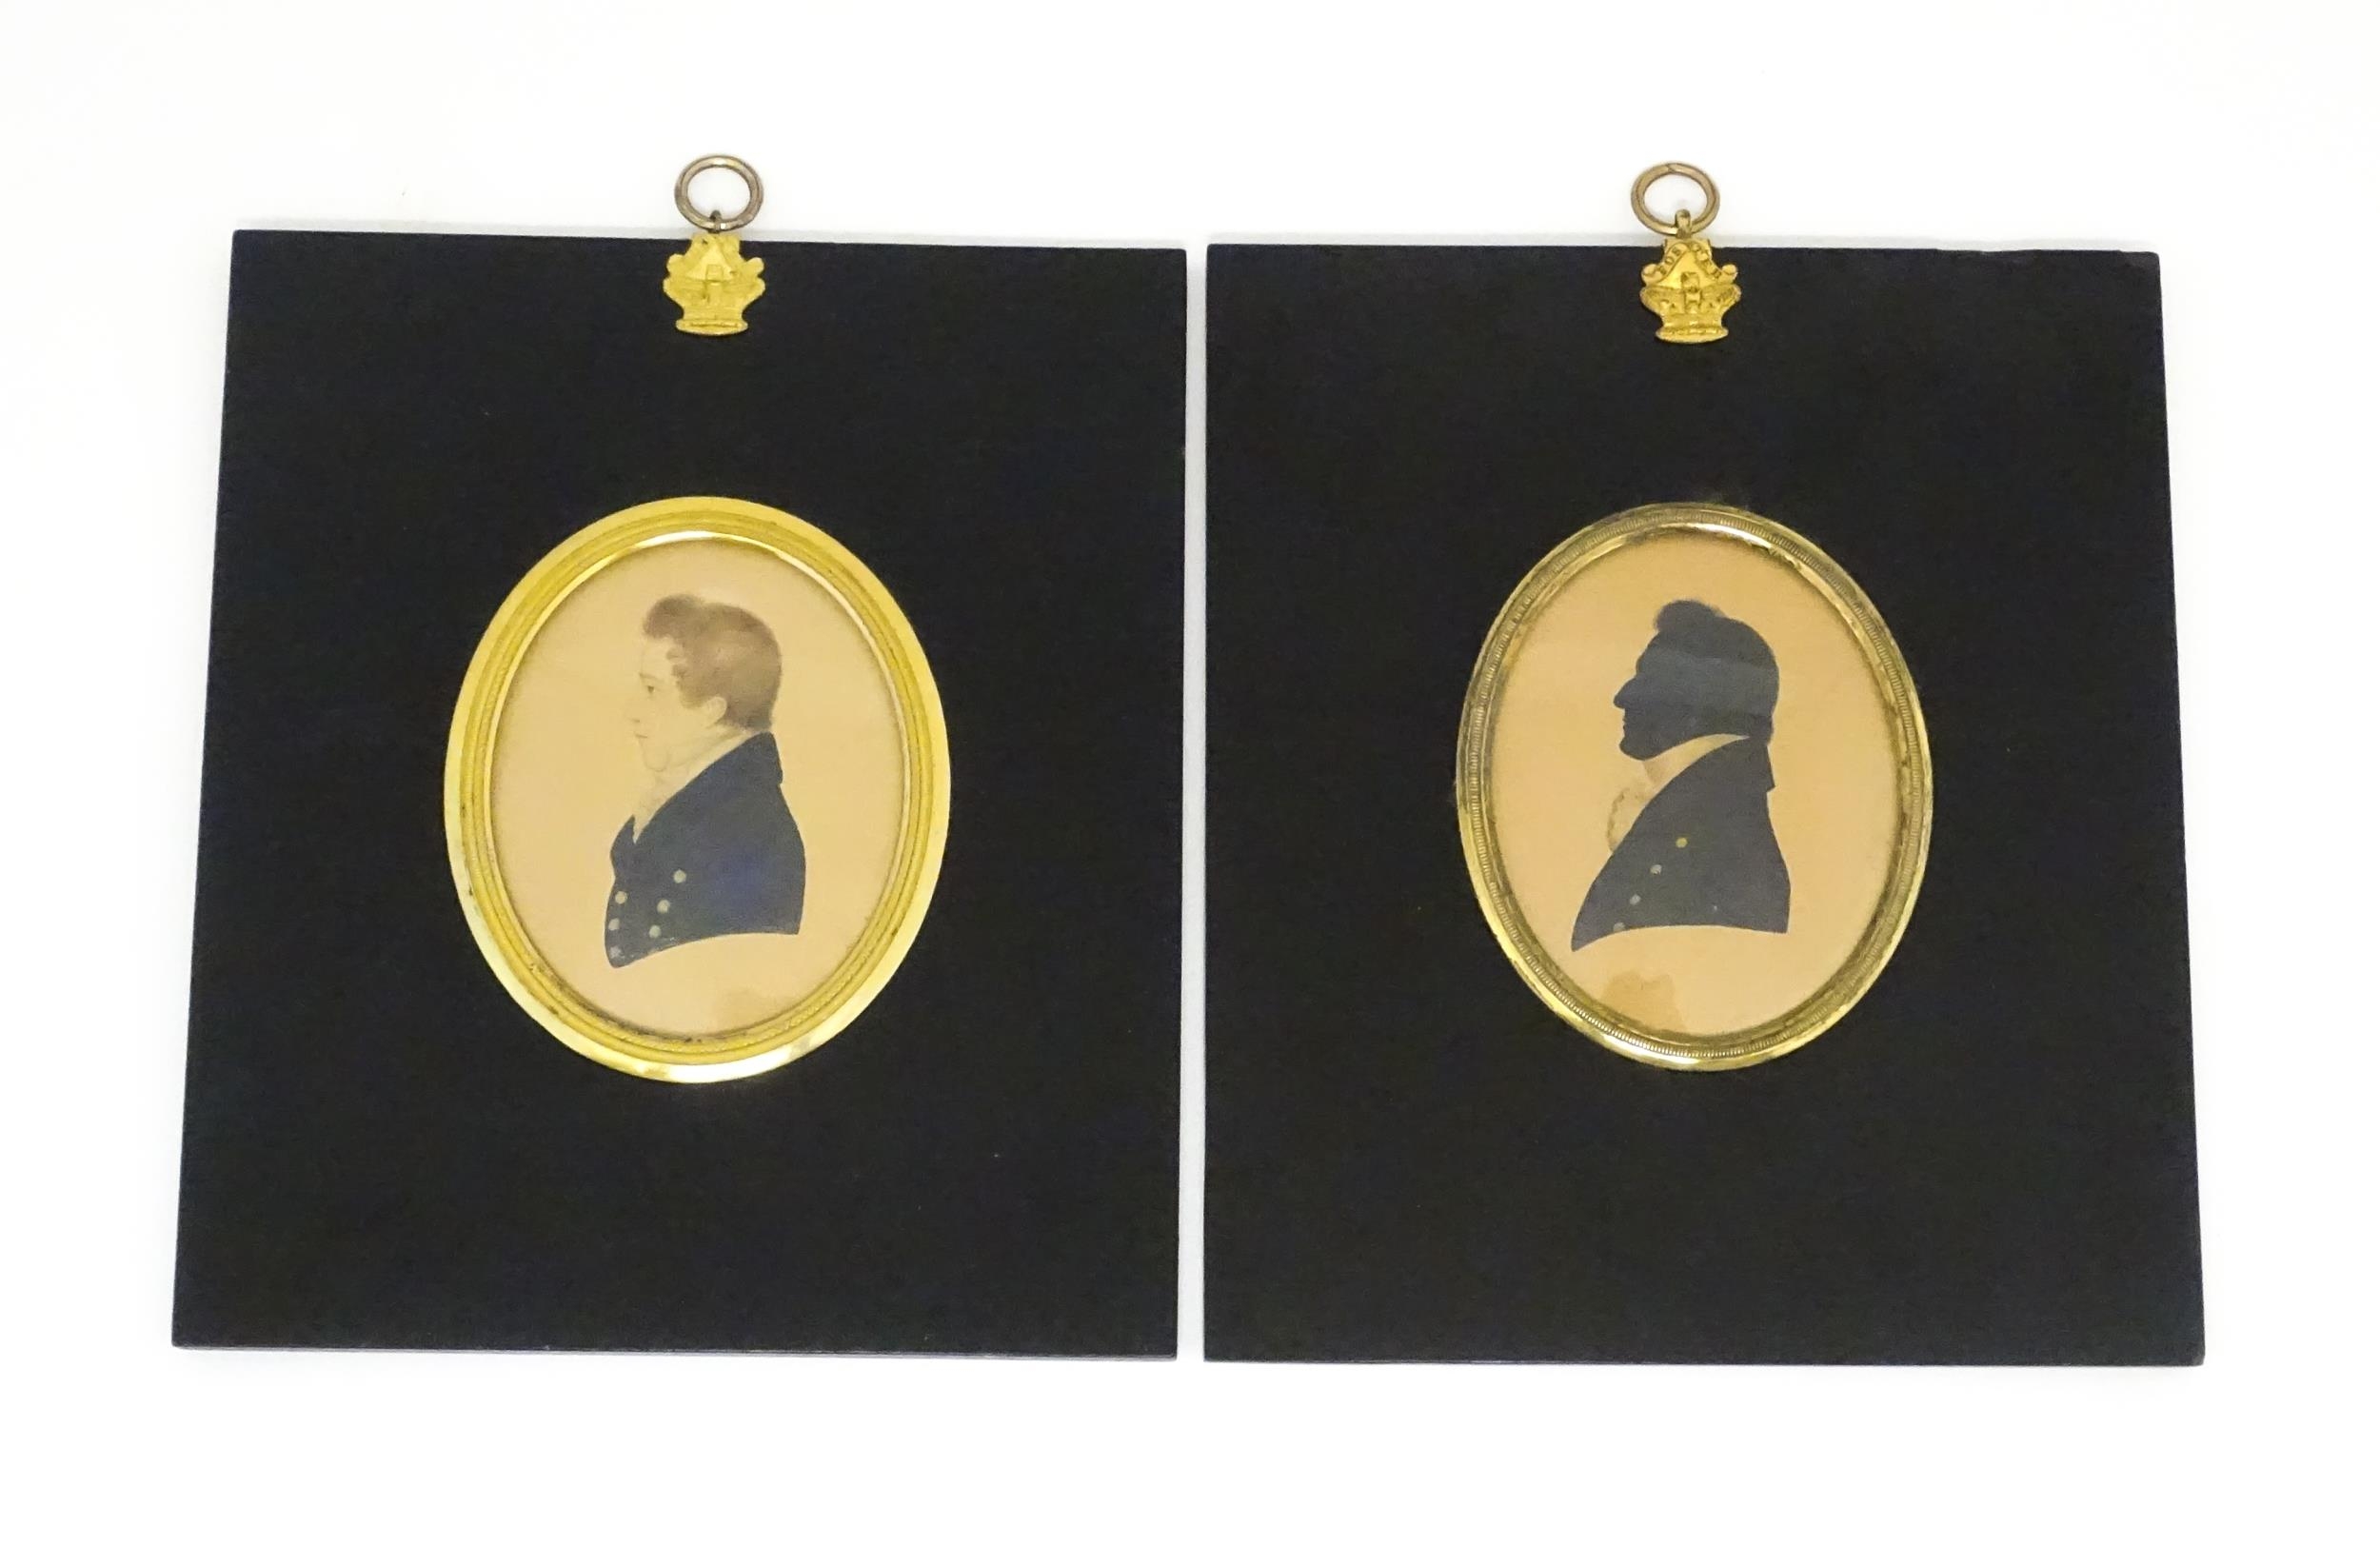 Two 19thC portrait miniature in the manner of Edward Ward Foster, one a silhouette portrait - Image 2 of 8